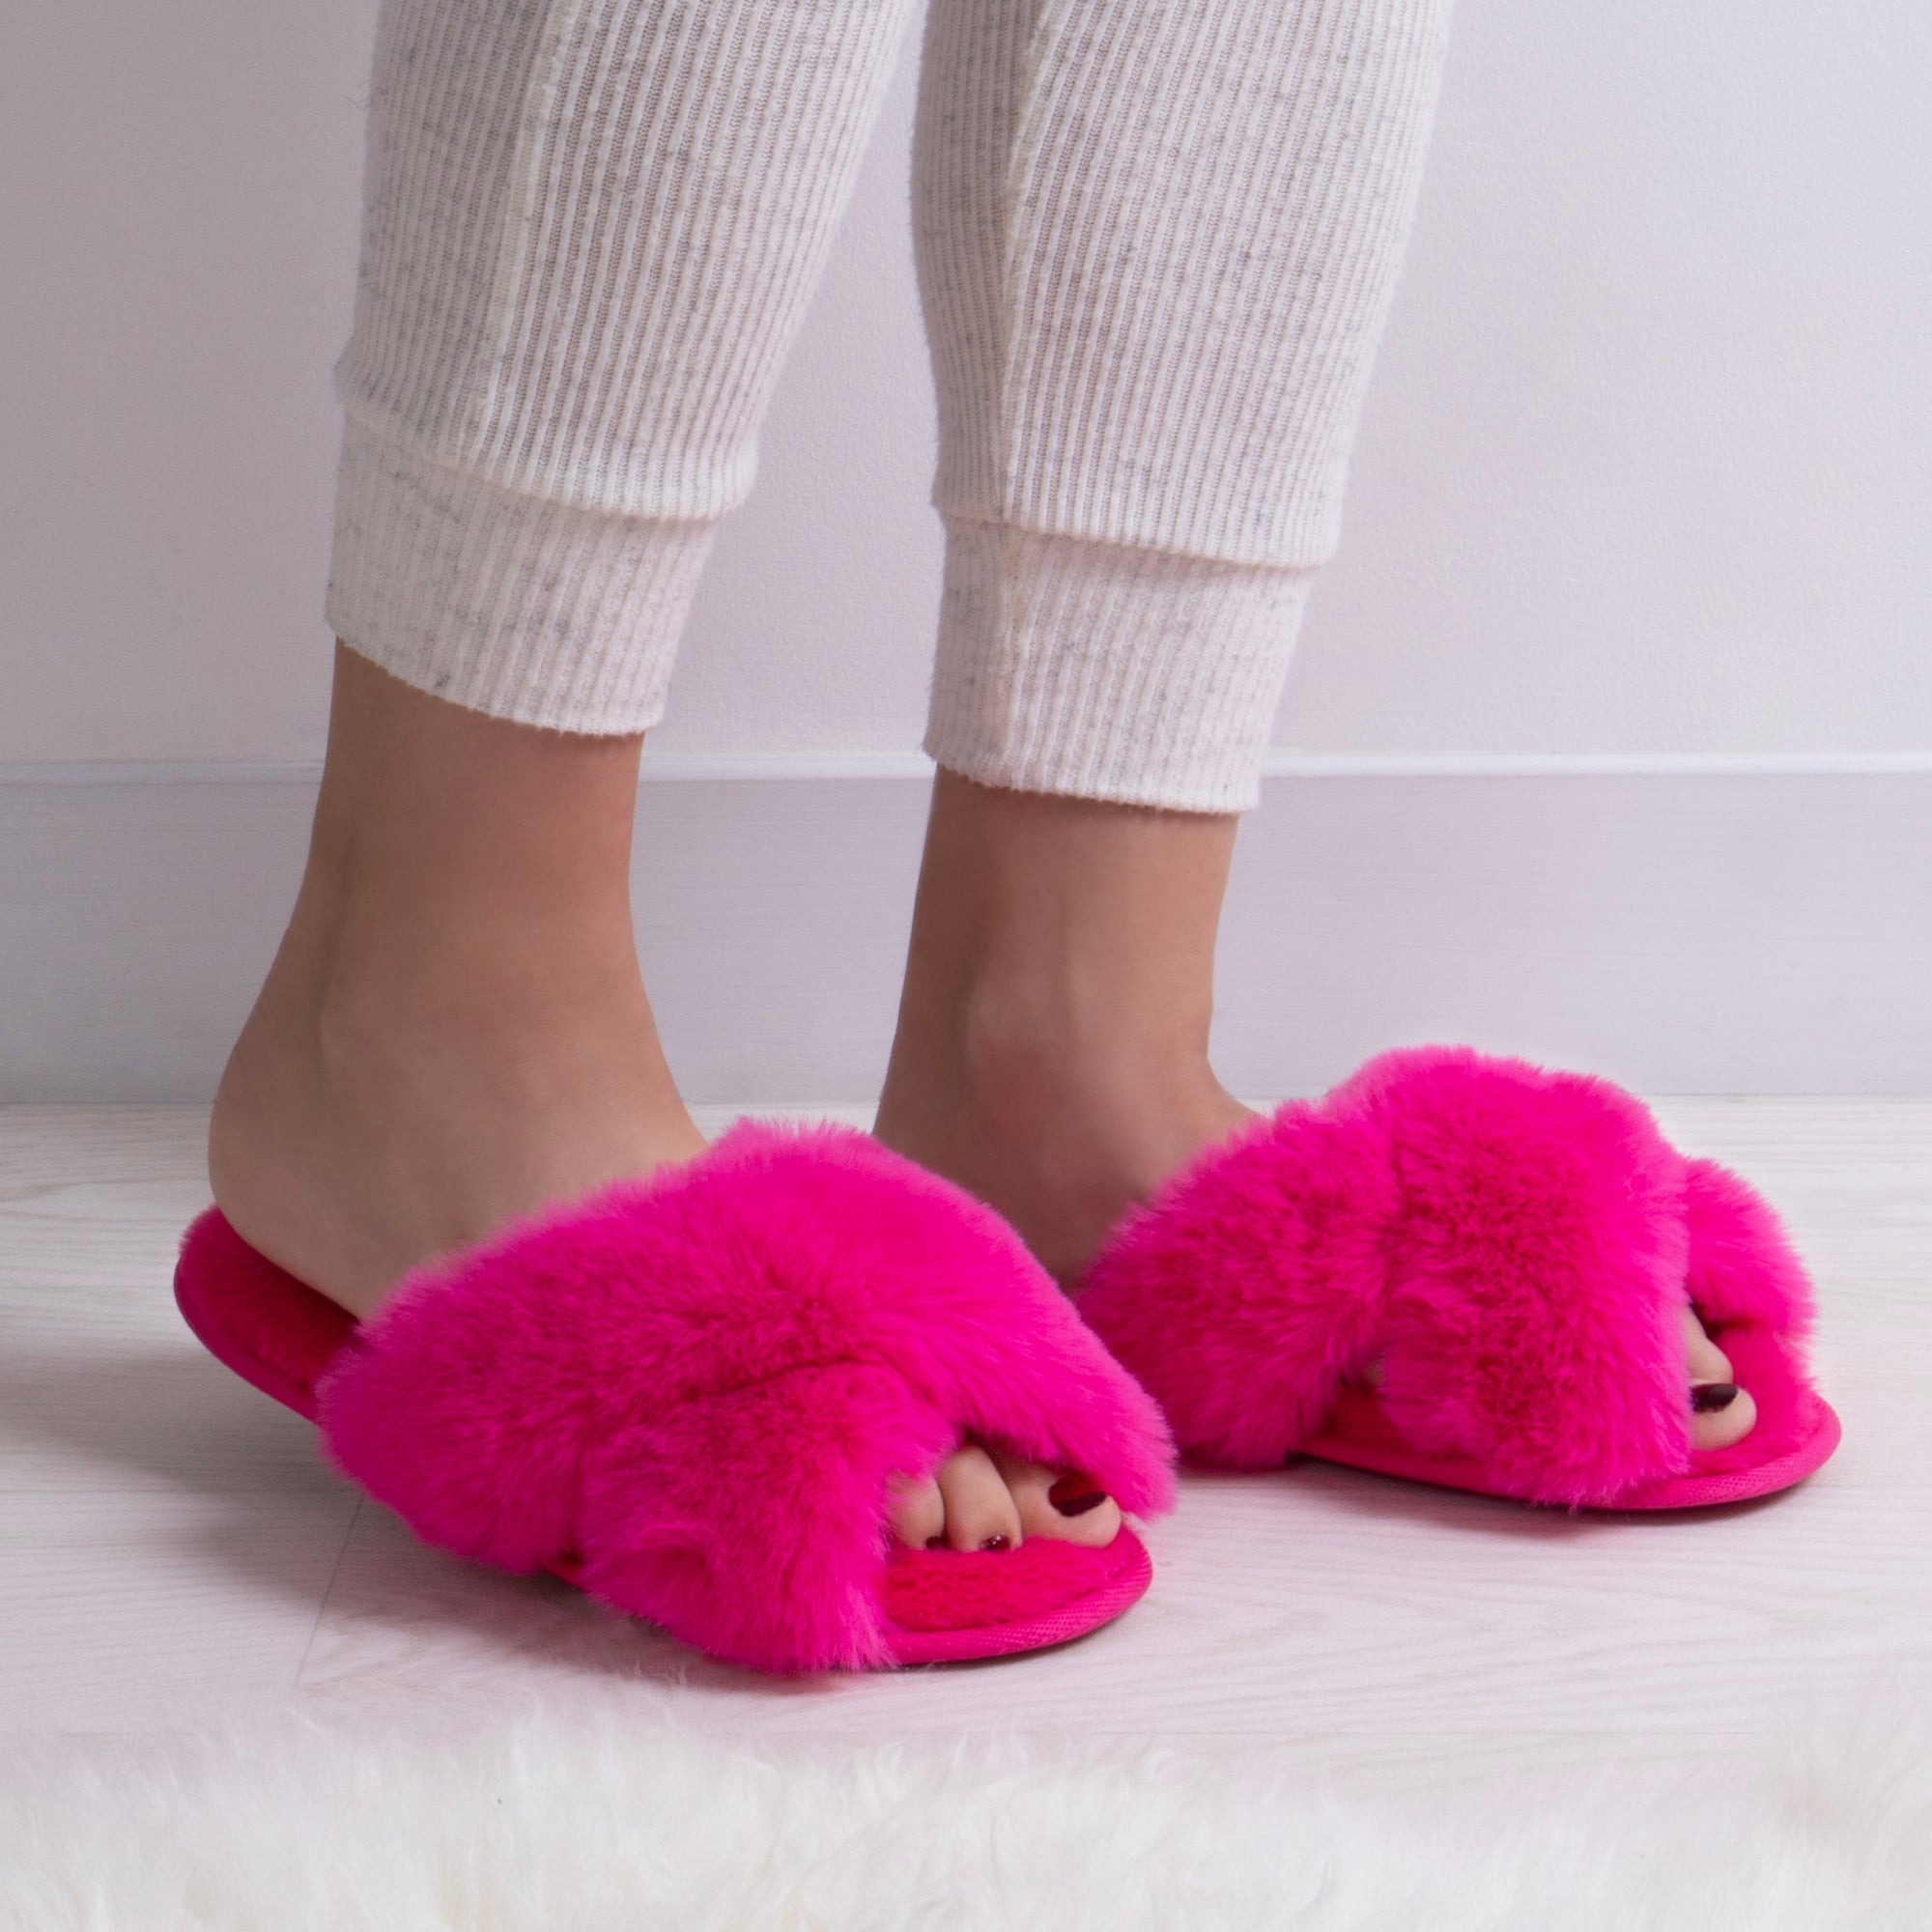 totes Plush Faux Fur Bright Pink Cross Over Sliders